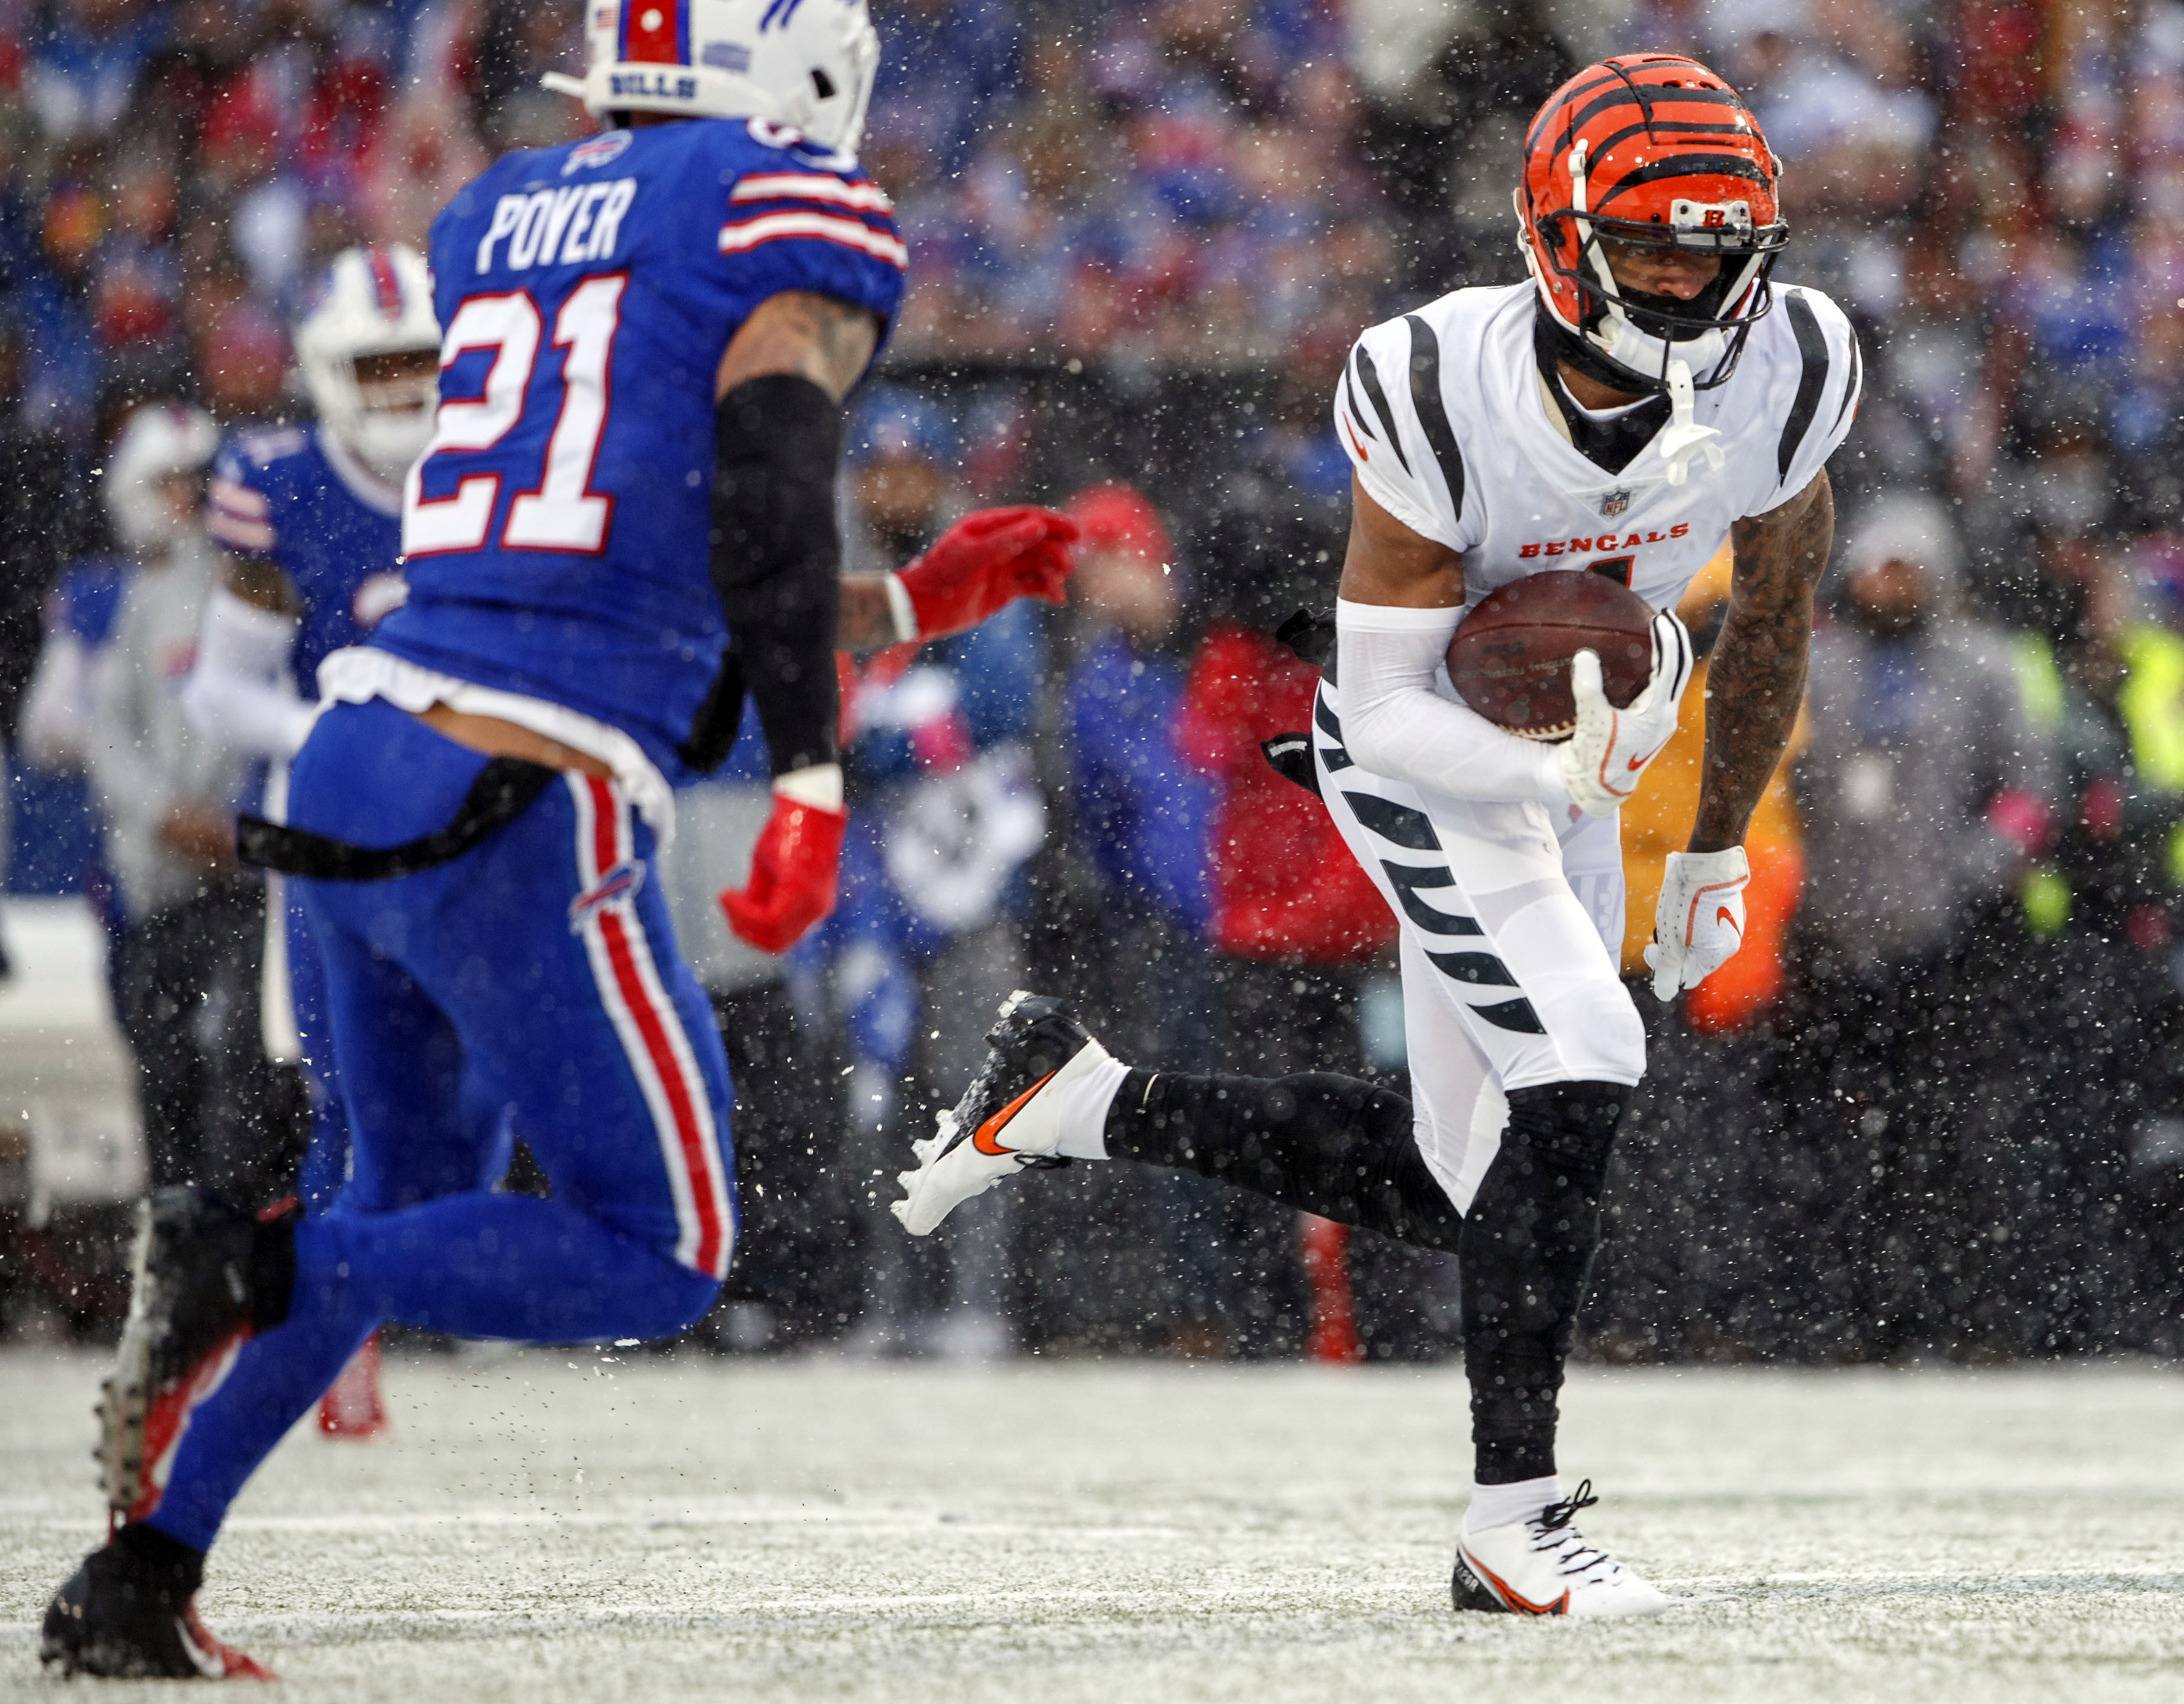 NFL Live In-Game Betting Tips & Strategy: Bengals vs. Browns – Week 1